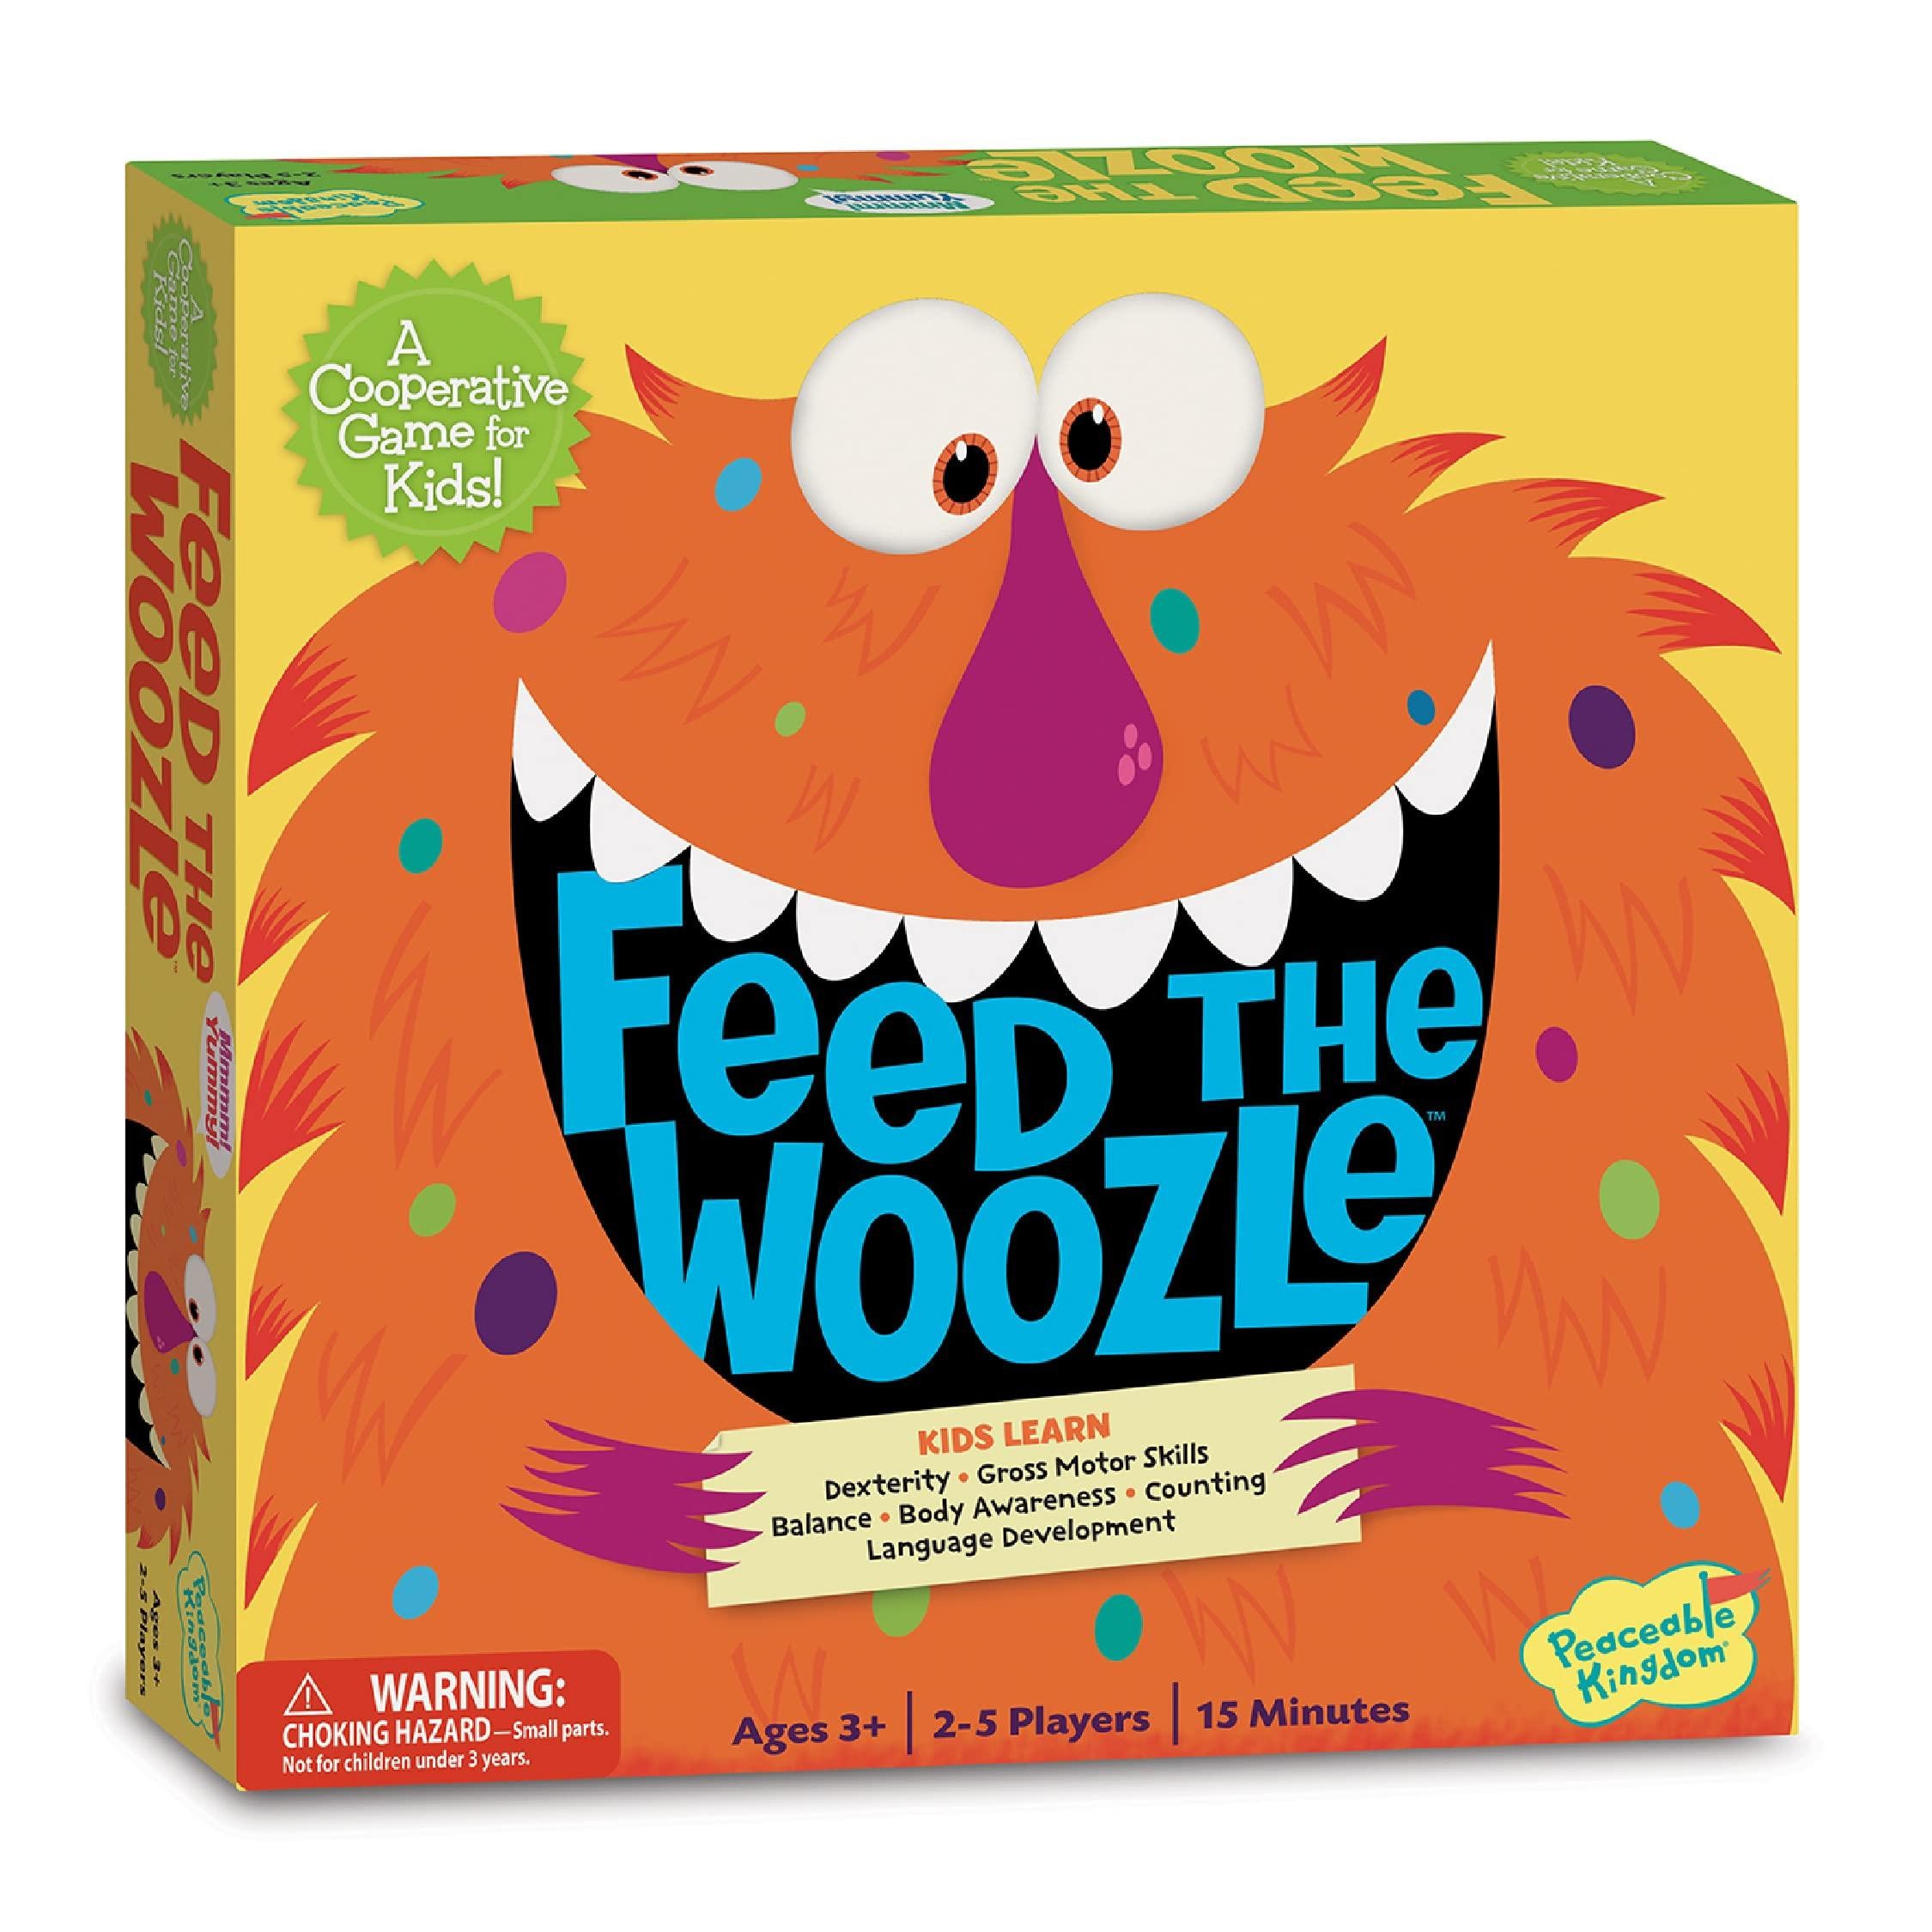 Feed the Wozzle